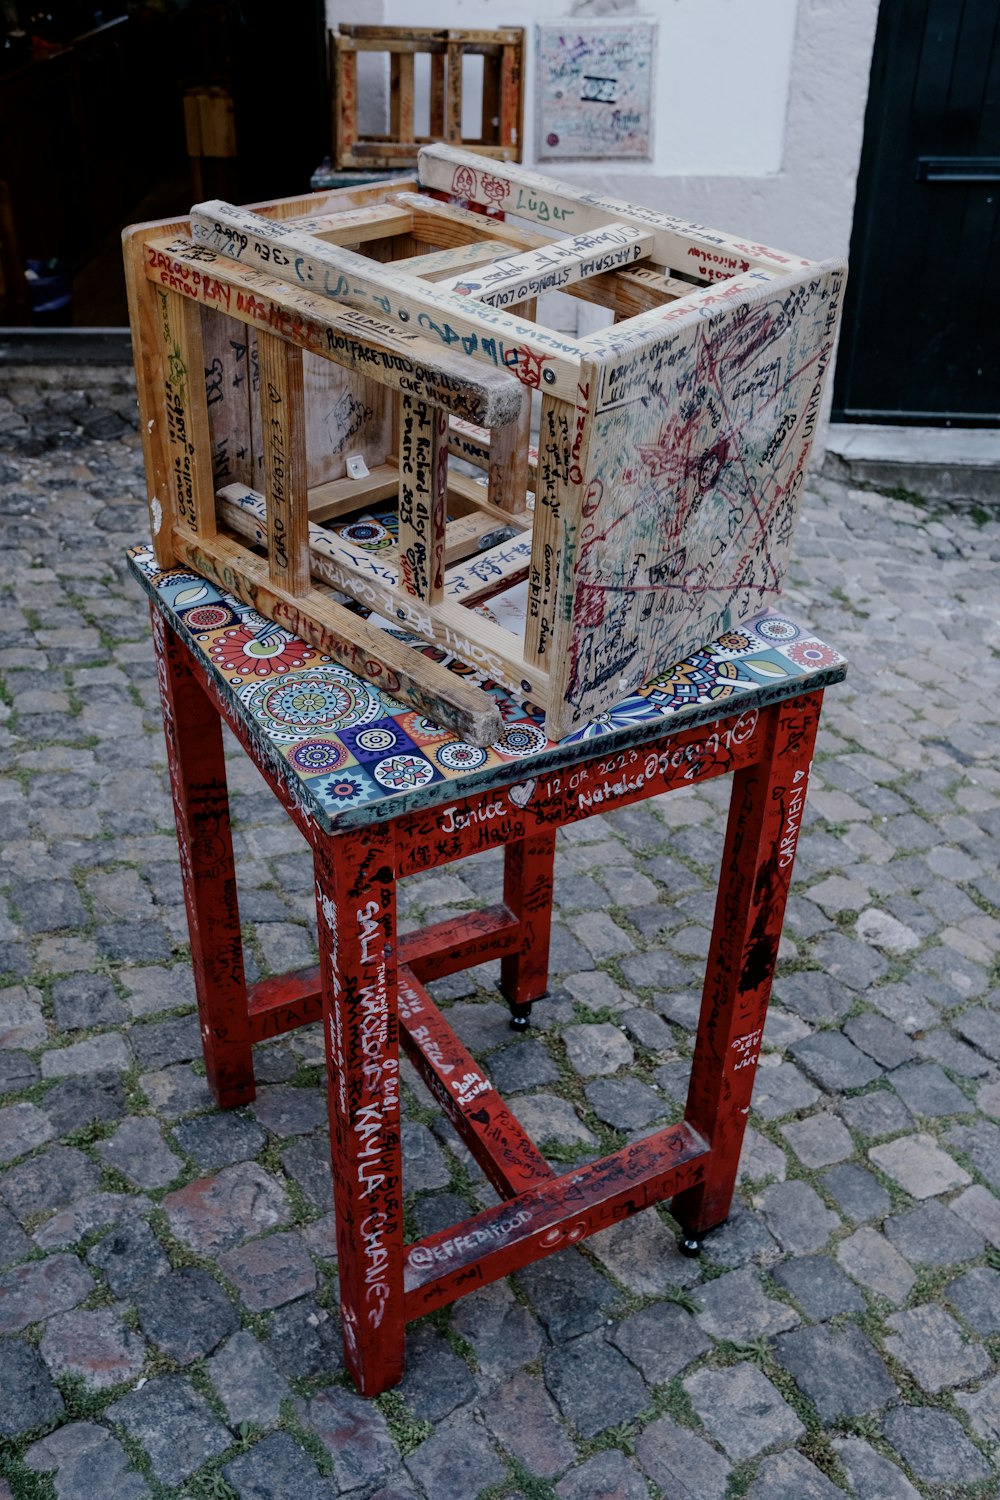 a chair made out of wooden pallets on a cobblestone street